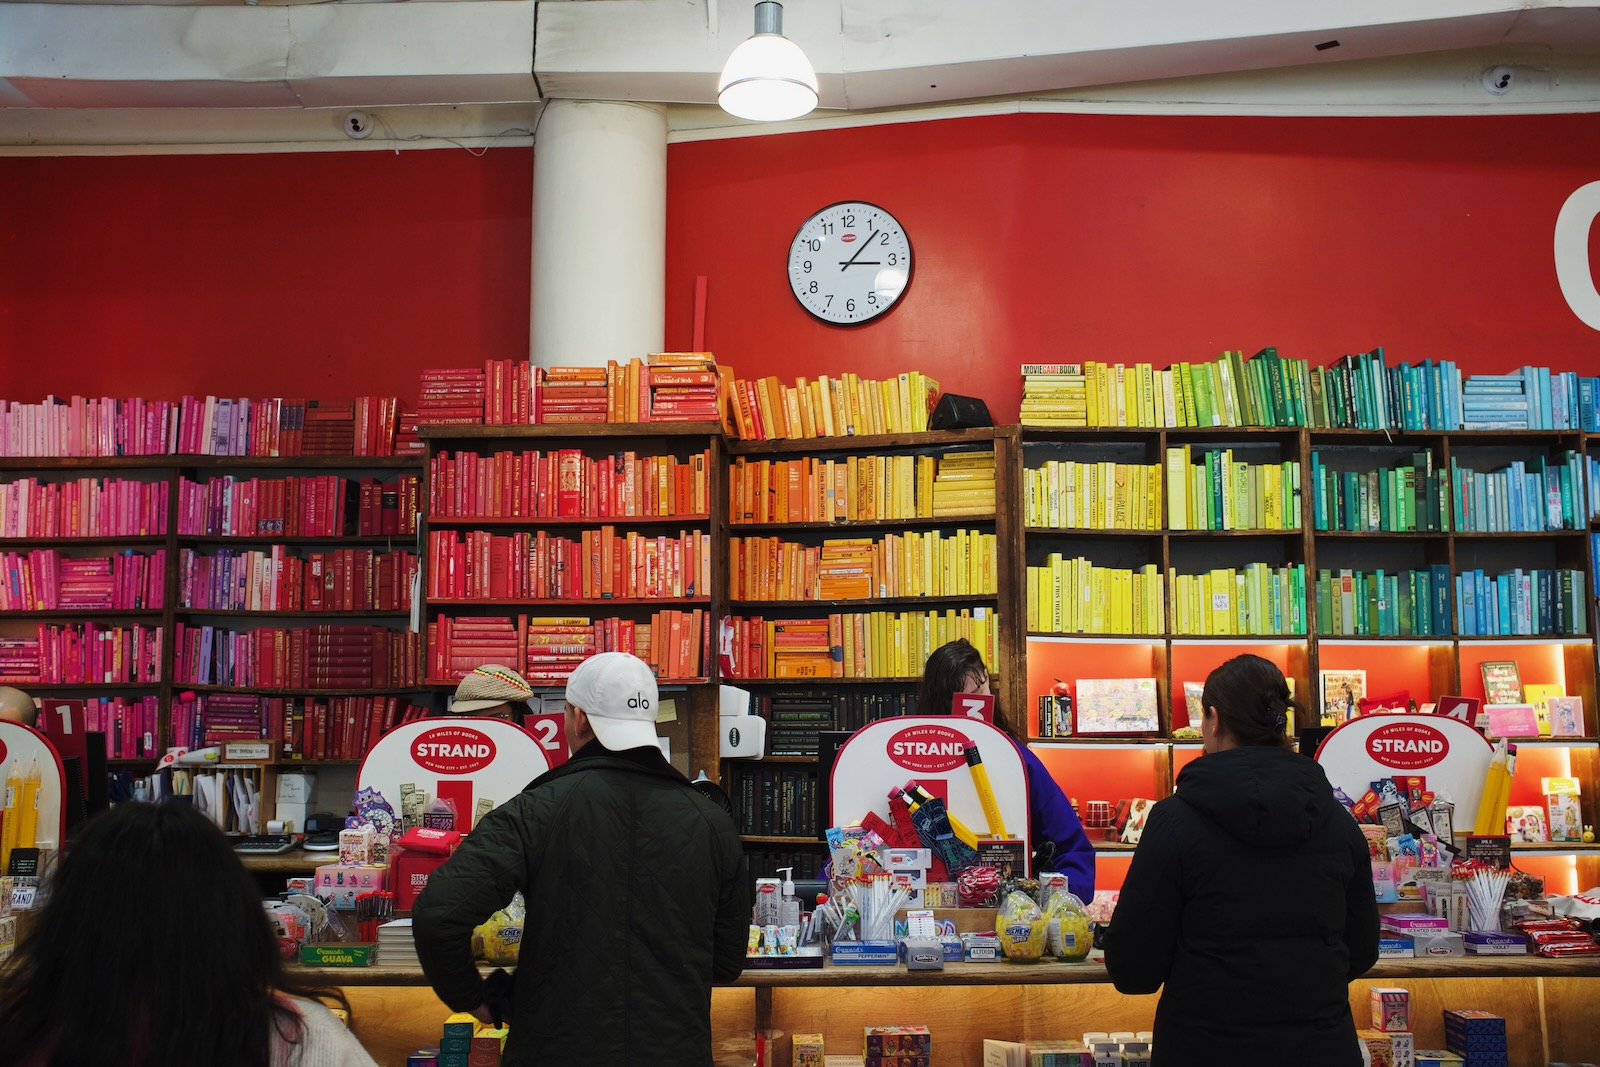 Strand bookstore in New York City. At the checkout counter, a wall of bookshelves decorated with books organized by color extends behind the cashiers.